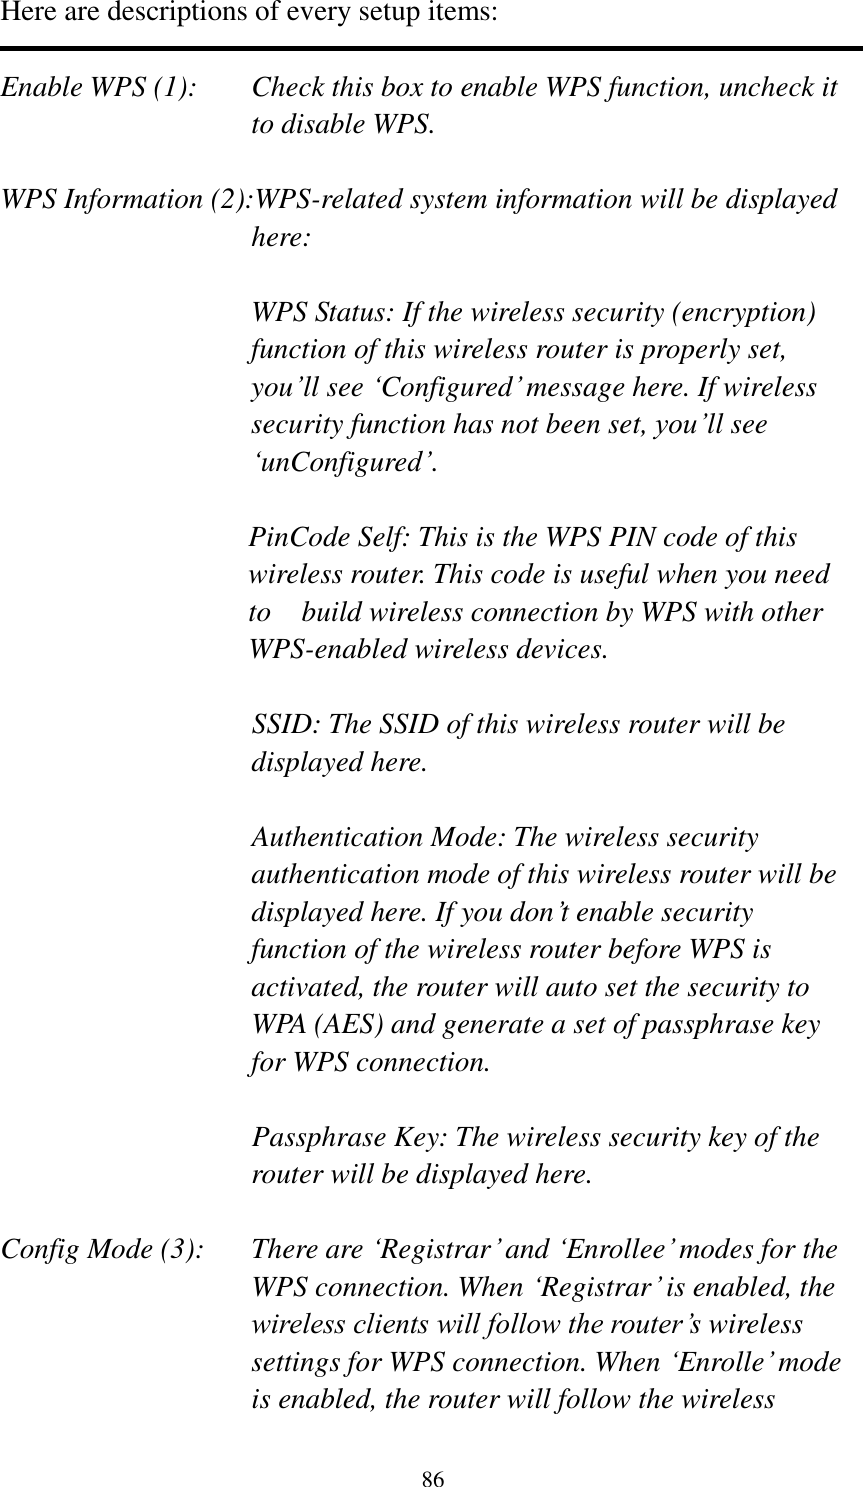 86 Here are descriptions of every setup items:  Enable WPS (1):  Check this box to enable WPS function, uncheck it to disable WPS.  WPS Information (2):WPS-related system information will be displayed here:  WPS Status: If the wireless security (encryption) function of this wireless router is properly set, you‟ll see „Configured‟ message here. If wireless security function has not been set, you‟ll see „unConfigured‟.  PinCode Self: This is the WPS PIN code of this wireless router. This code is useful when you need to    build wireless connection by WPS with other WPS-enabled wireless devices.  SSID: The SSID of this wireless router will be displayed here.  Authentication Mode: The wireless security authentication mode of this wireless router will be displayed here. If you don‟t enable security function of the wireless router before WPS is activated, the router will auto set the security to WPA (AES) and generate a set of passphrase key for WPS connection.  Passphrase Key: The wireless security key of the router will be displayed here.  Config Mode (3):  There are „Registrar‟ and „Enrollee‟ modes for the WPS connection. When „Registrar‟ is enabled, the wireless clients will follow the router‟s wireless settings for WPS connection. When „Enrolle‟ mode is enabled, the router will follow the wireless 